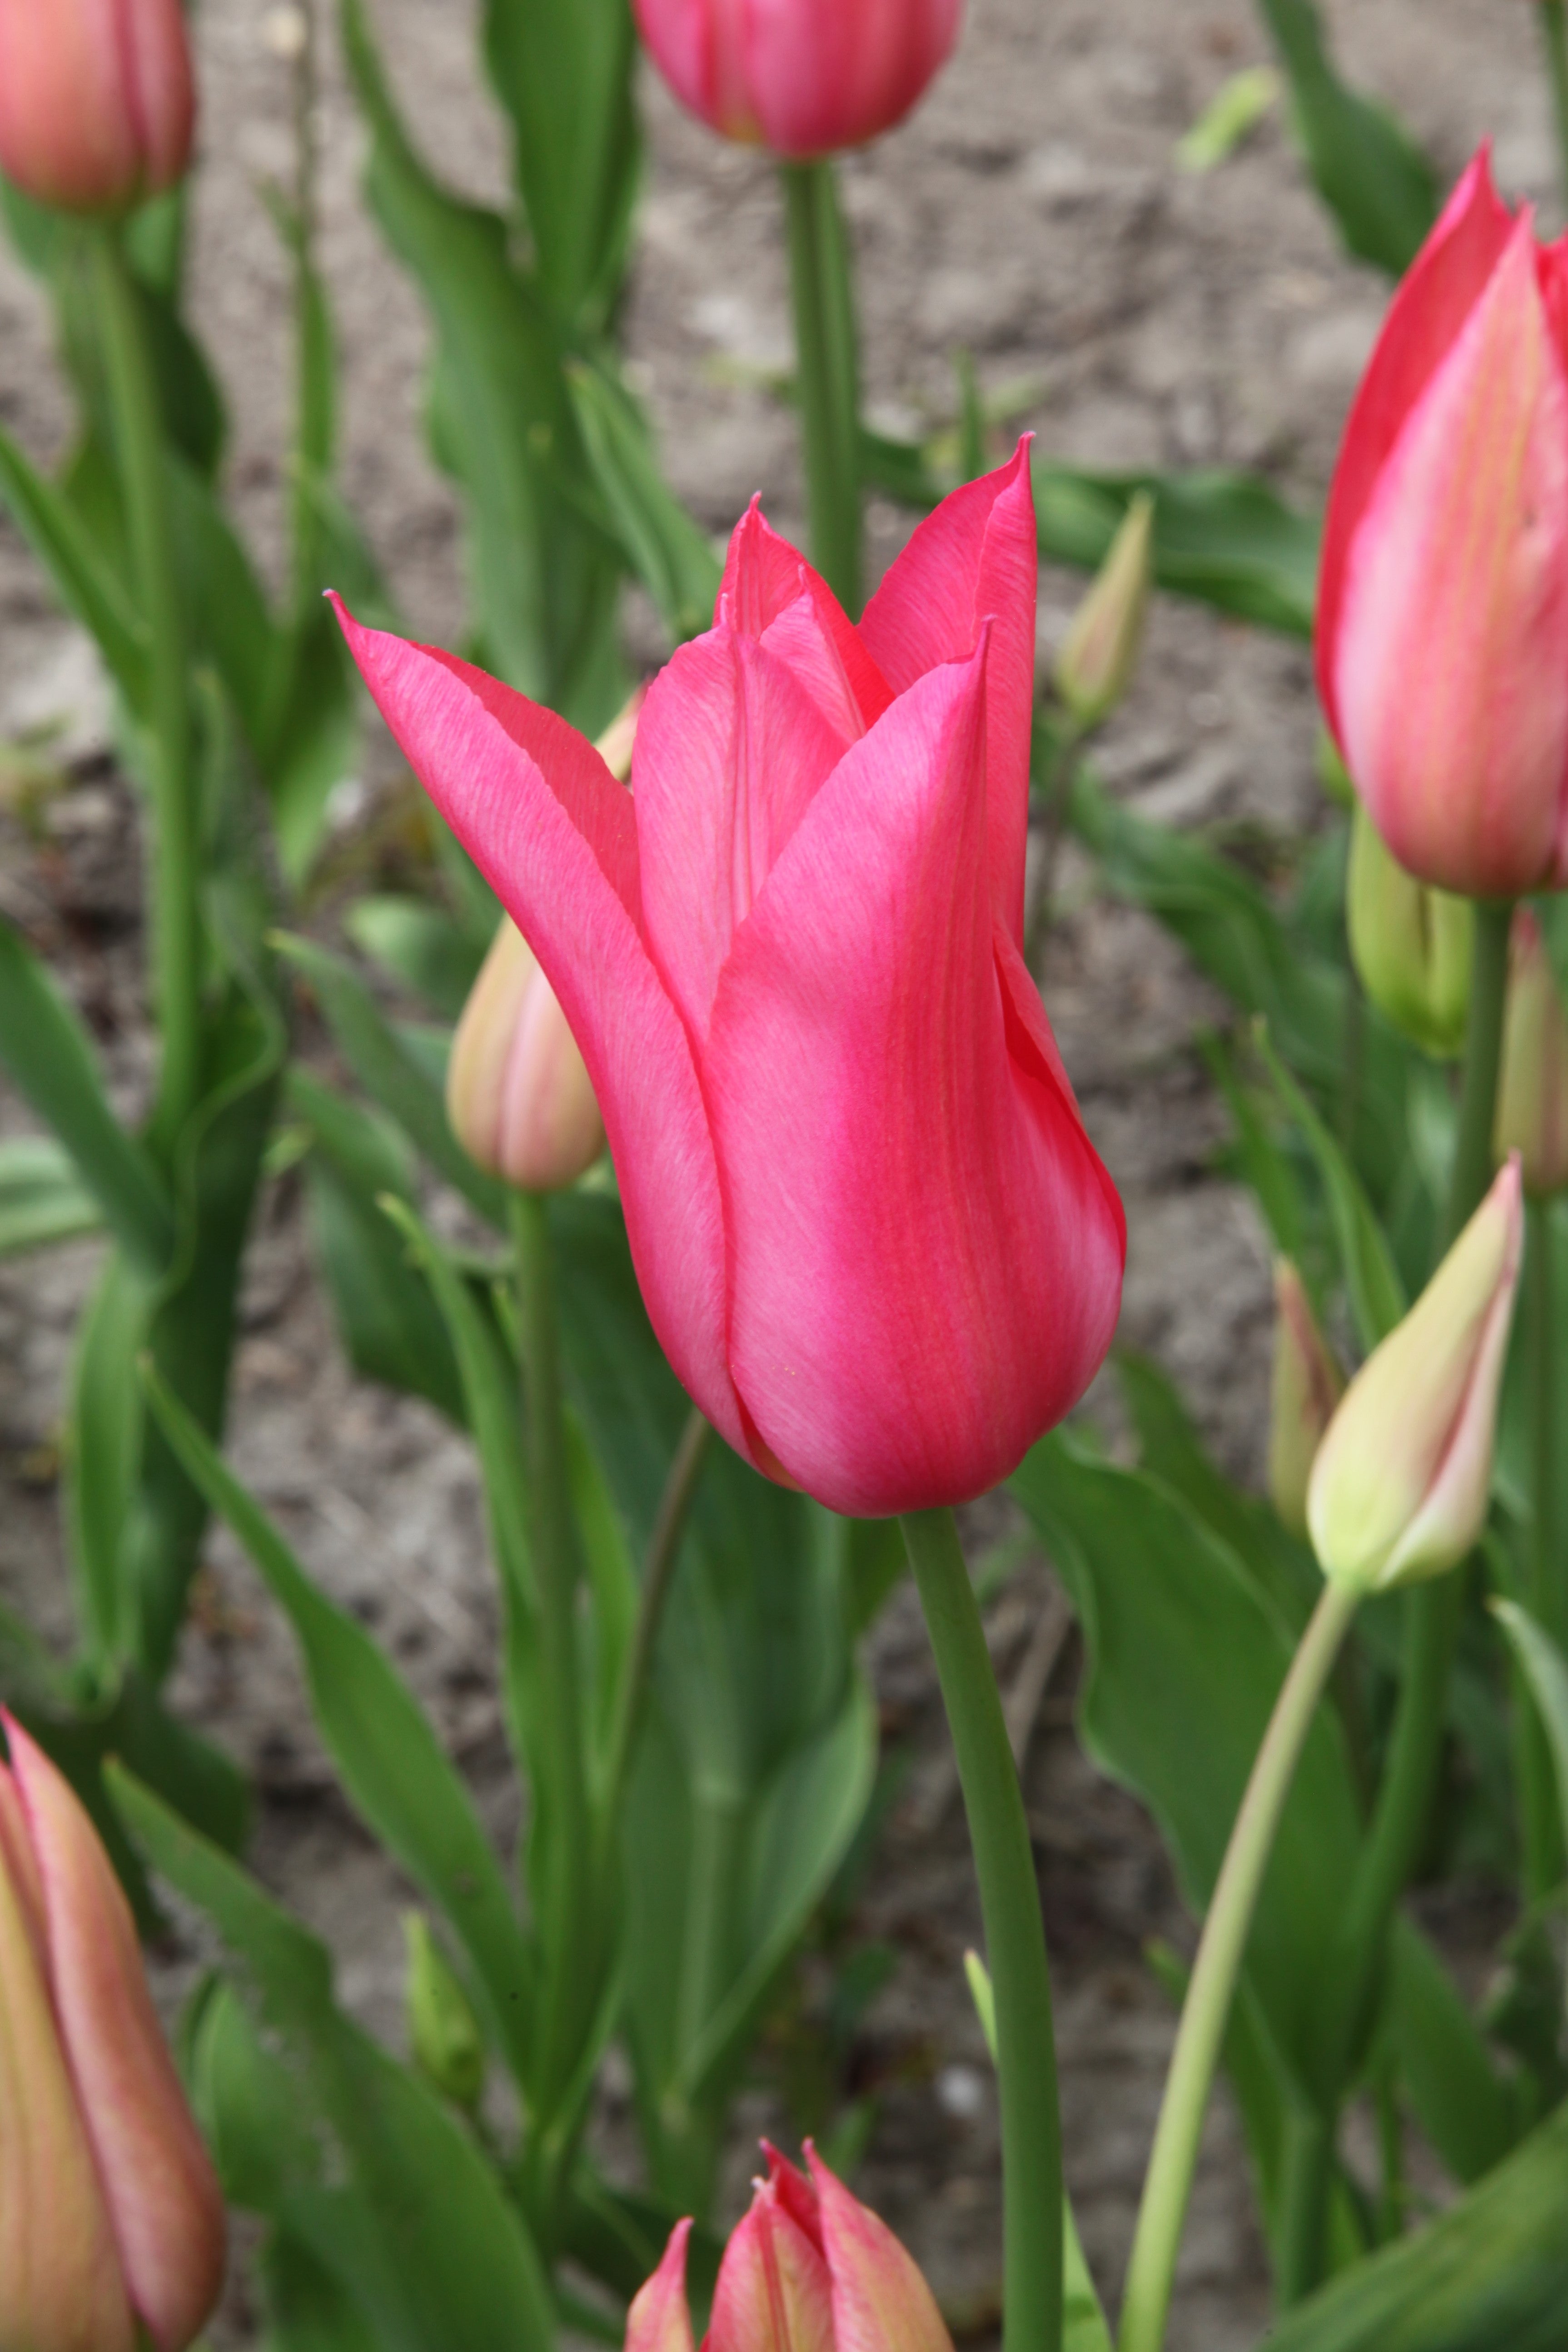 Vibrant Lily flowering tulip 'Mariette' showcasing its graceful pink blooms